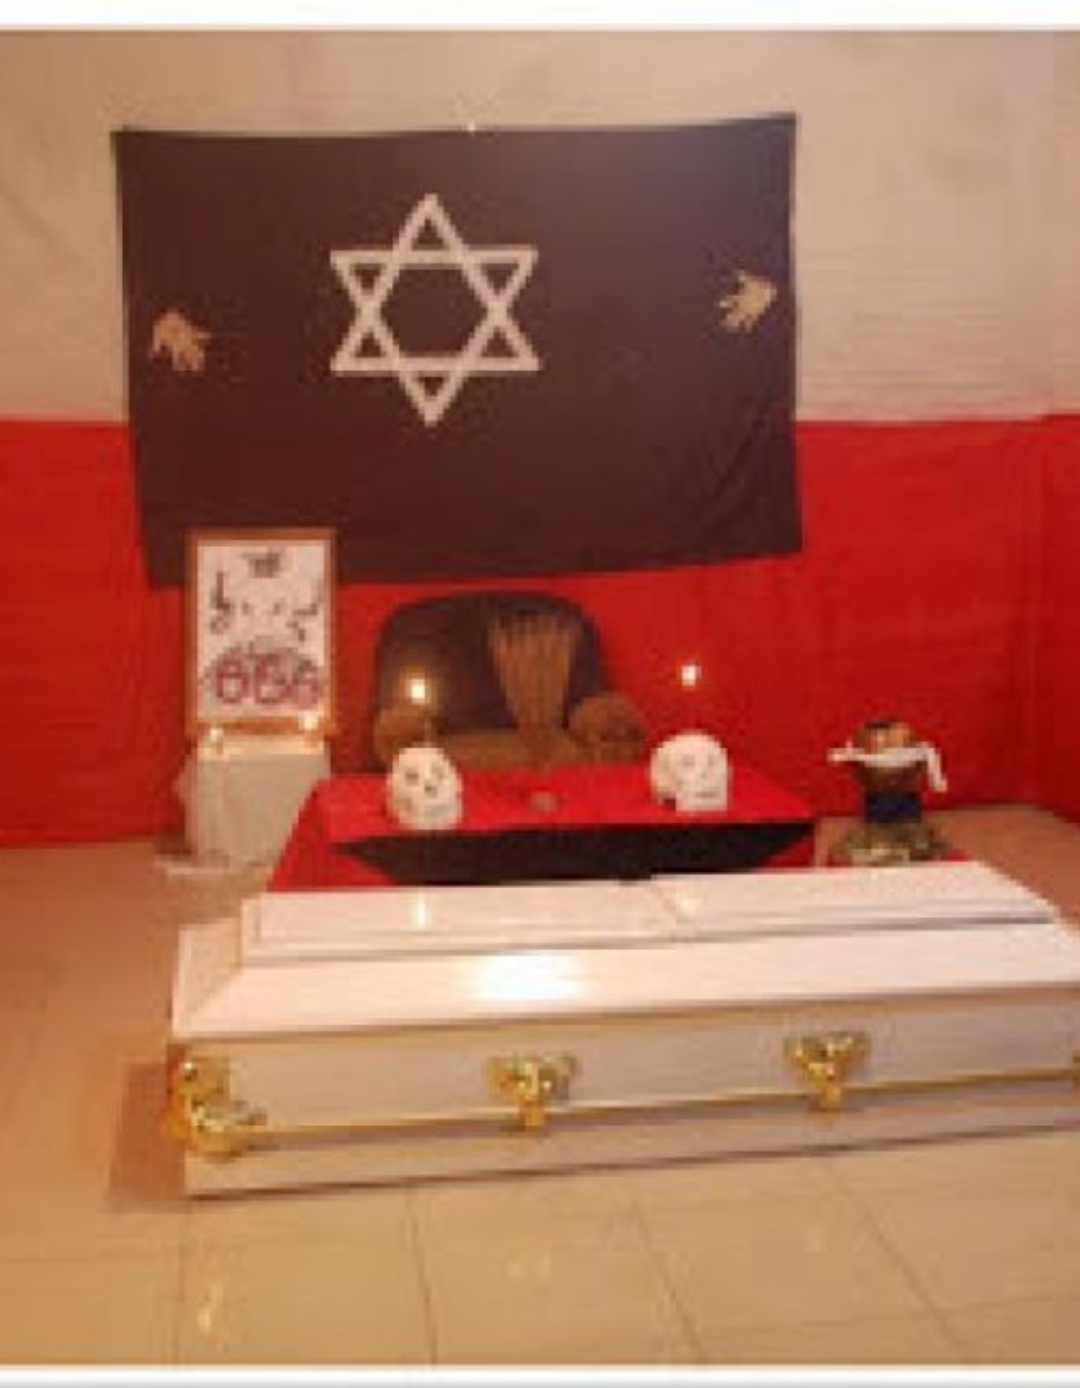 +2349025235625 ##$$ I want to join occult for money ritual, Olur, Gansu, China